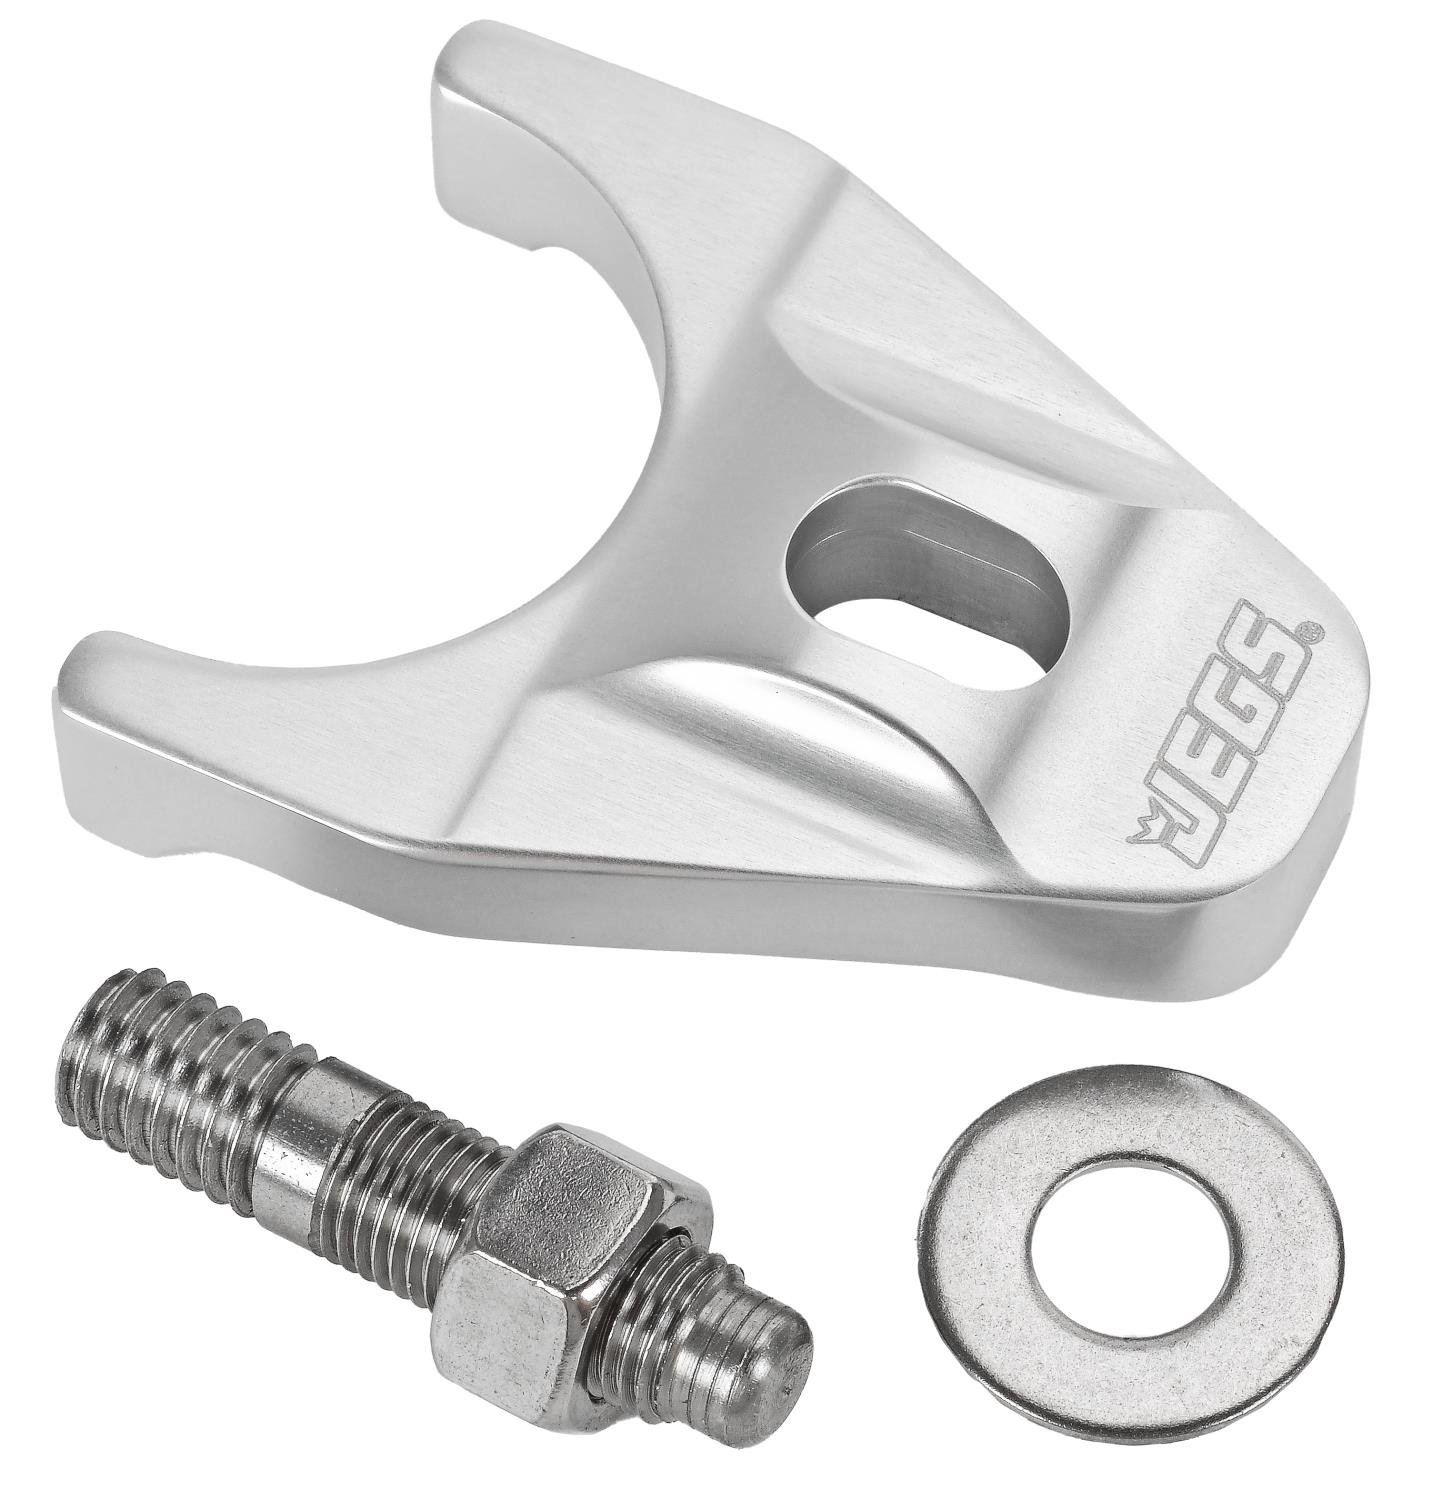 Billet Distributor Hold-Down Clamp Chevy: 90° V6, Small Block, and Big Block